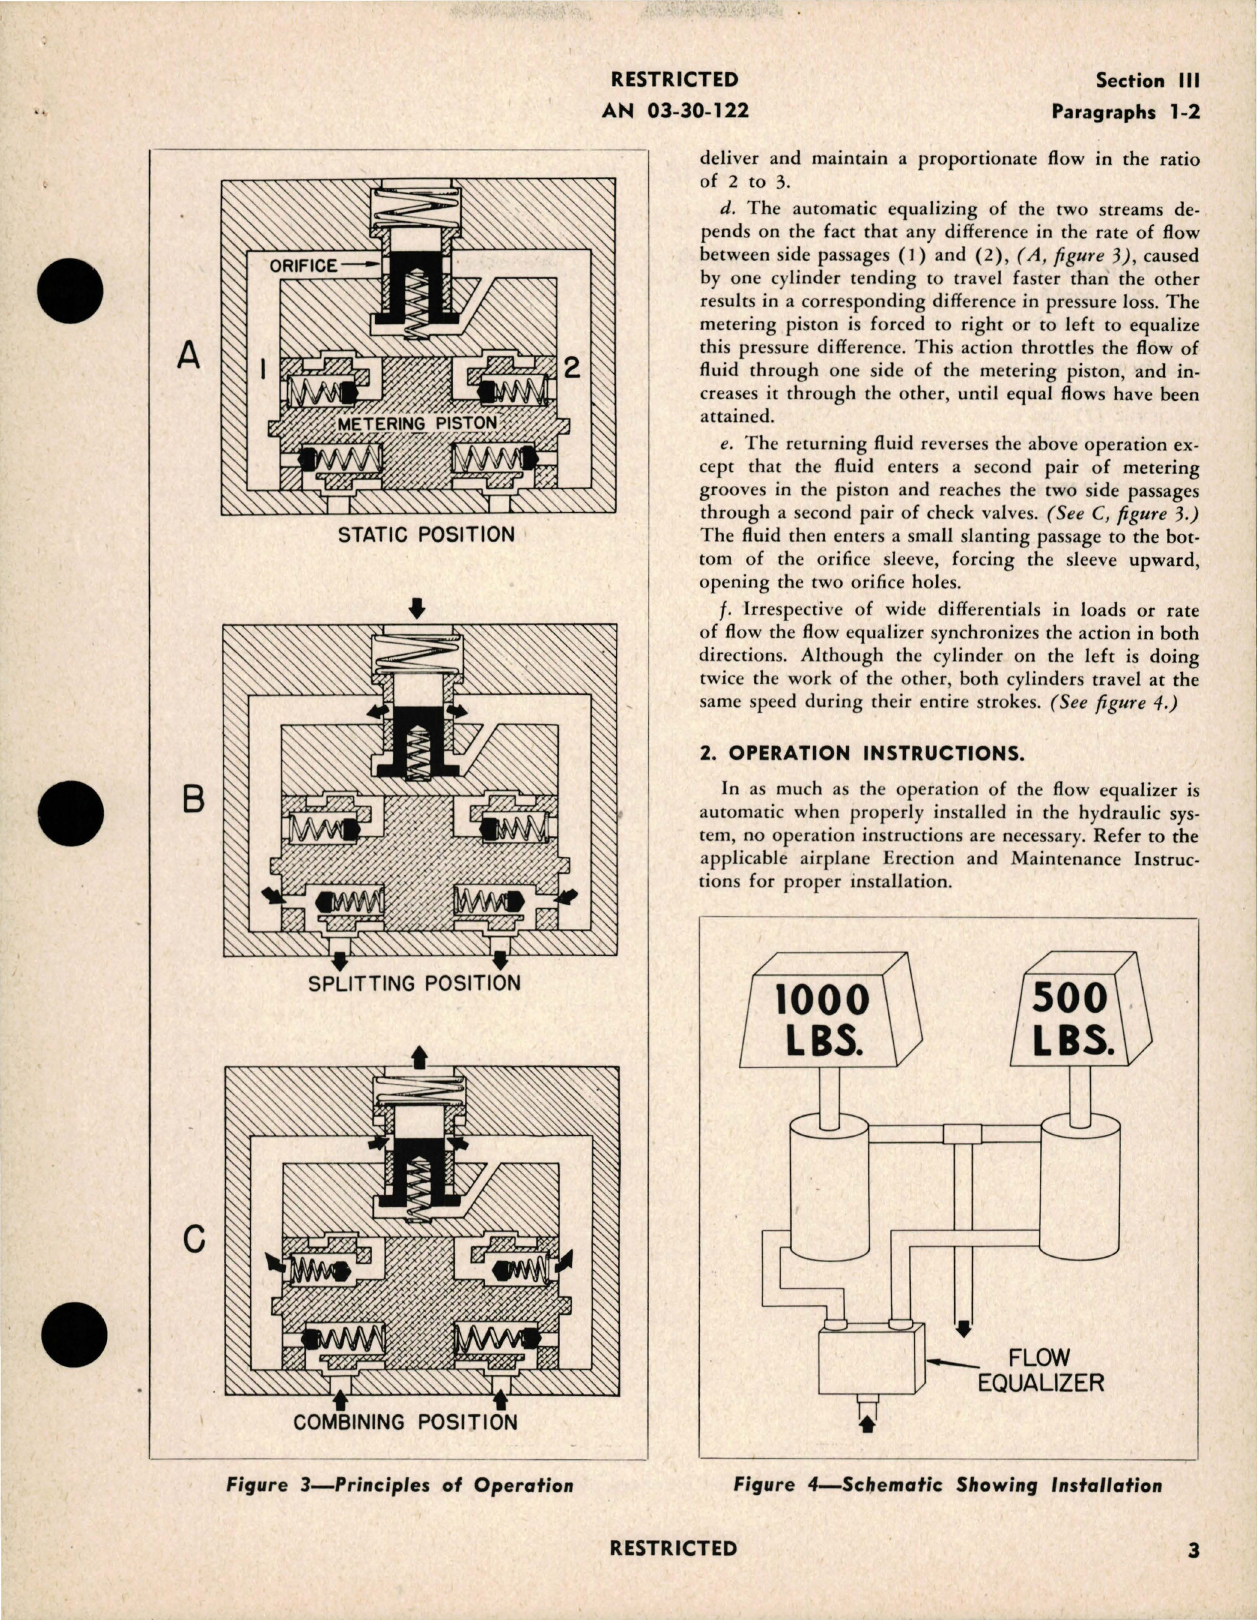 Sample page 7 from AirCorps Library document: Overhaul Instructions with Parts Catalog for Hydraulic Flow Equalizer & Proportioner